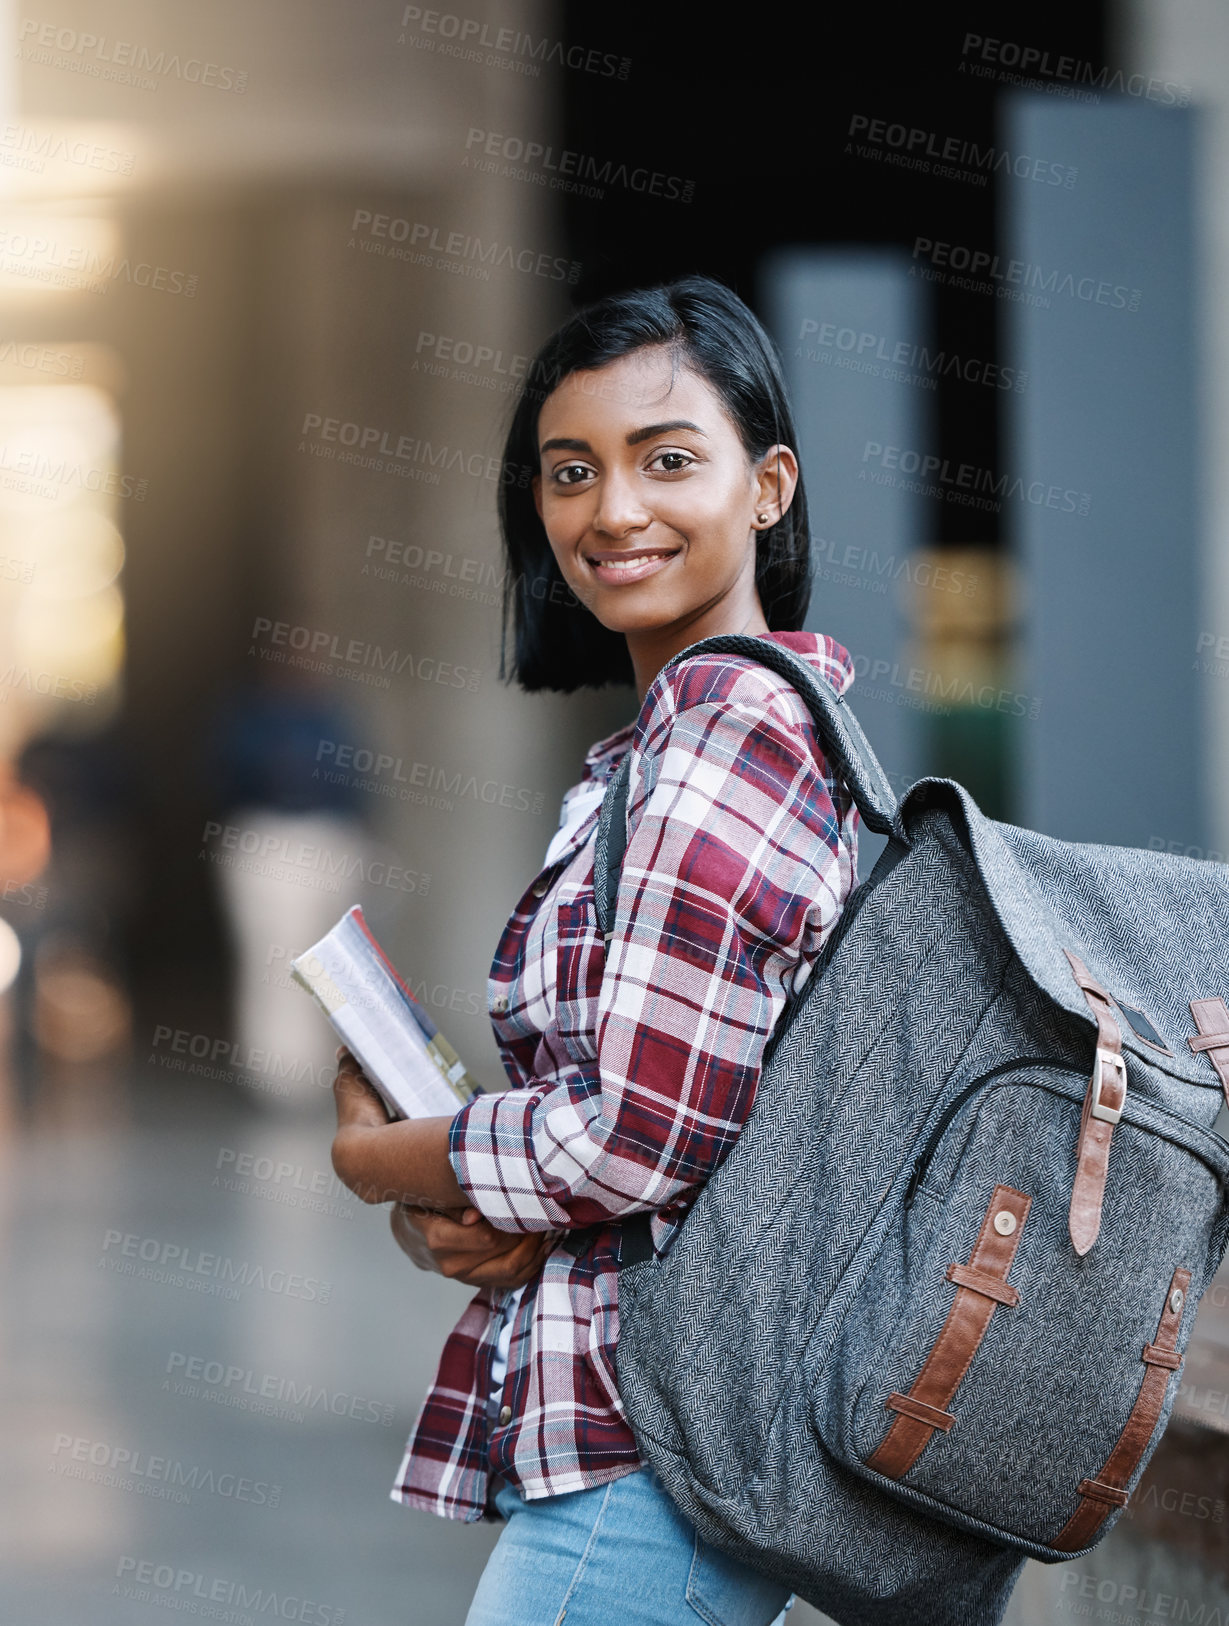 Buy stock photo Rearview portrait of an attractive young female student walking around campus